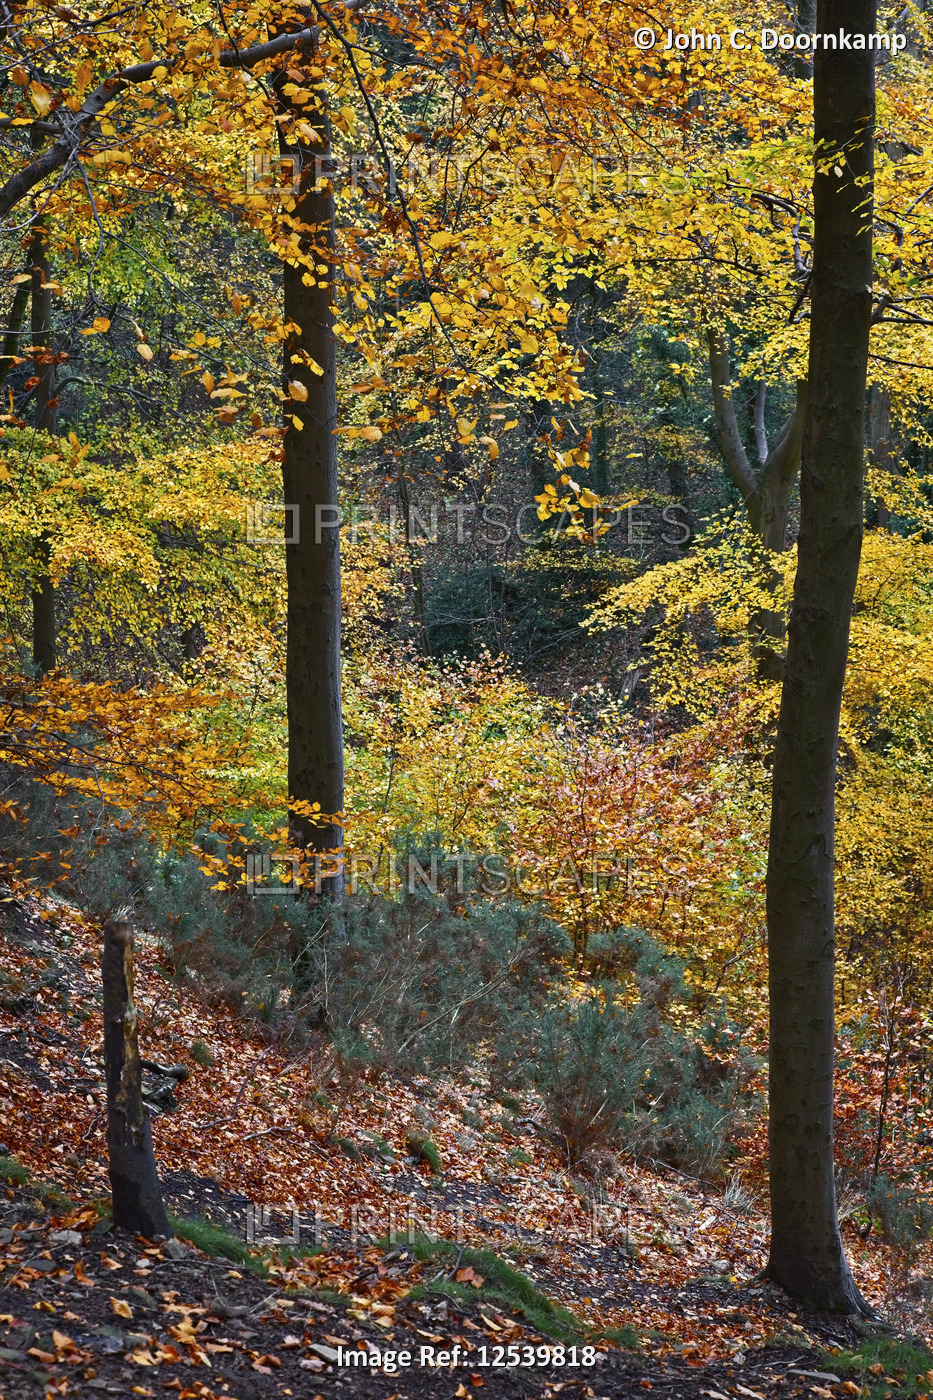 A  BEECH WOODLAND IN ITS COLORFUL FALL GLORY